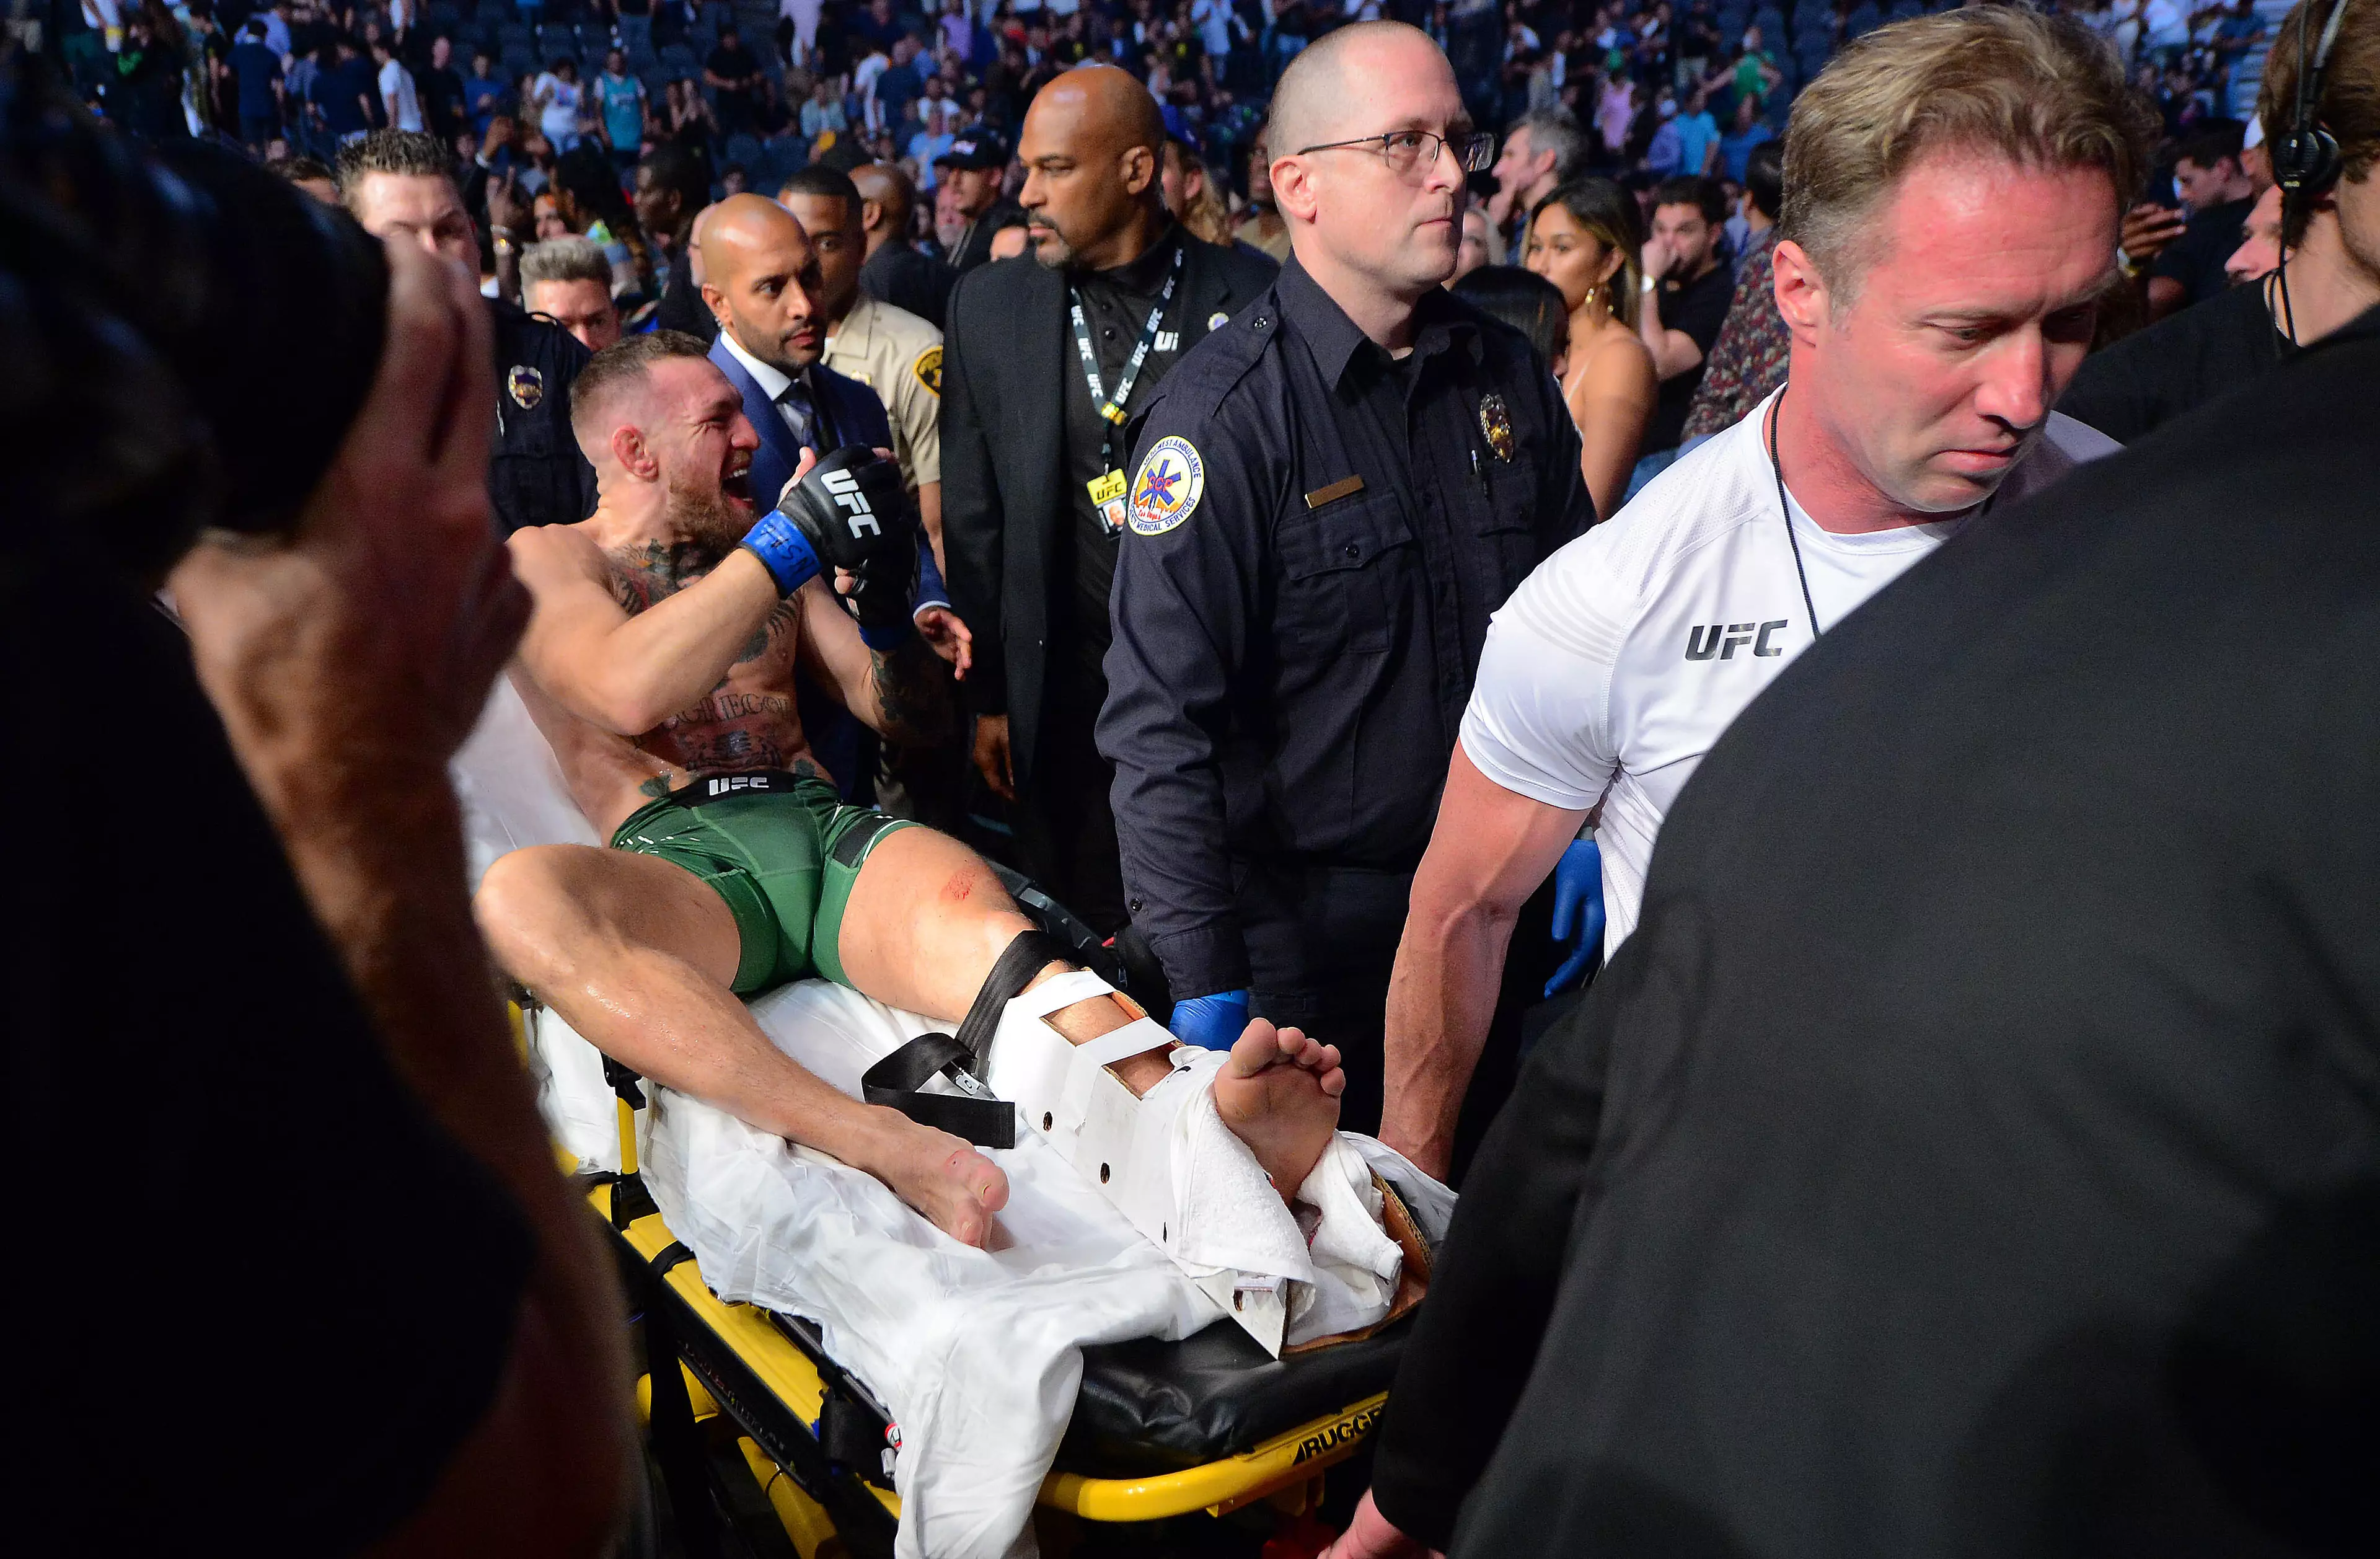 McGregor's recent injury hasn't stopped him continuing his feud with Poirier. Image: PA Images